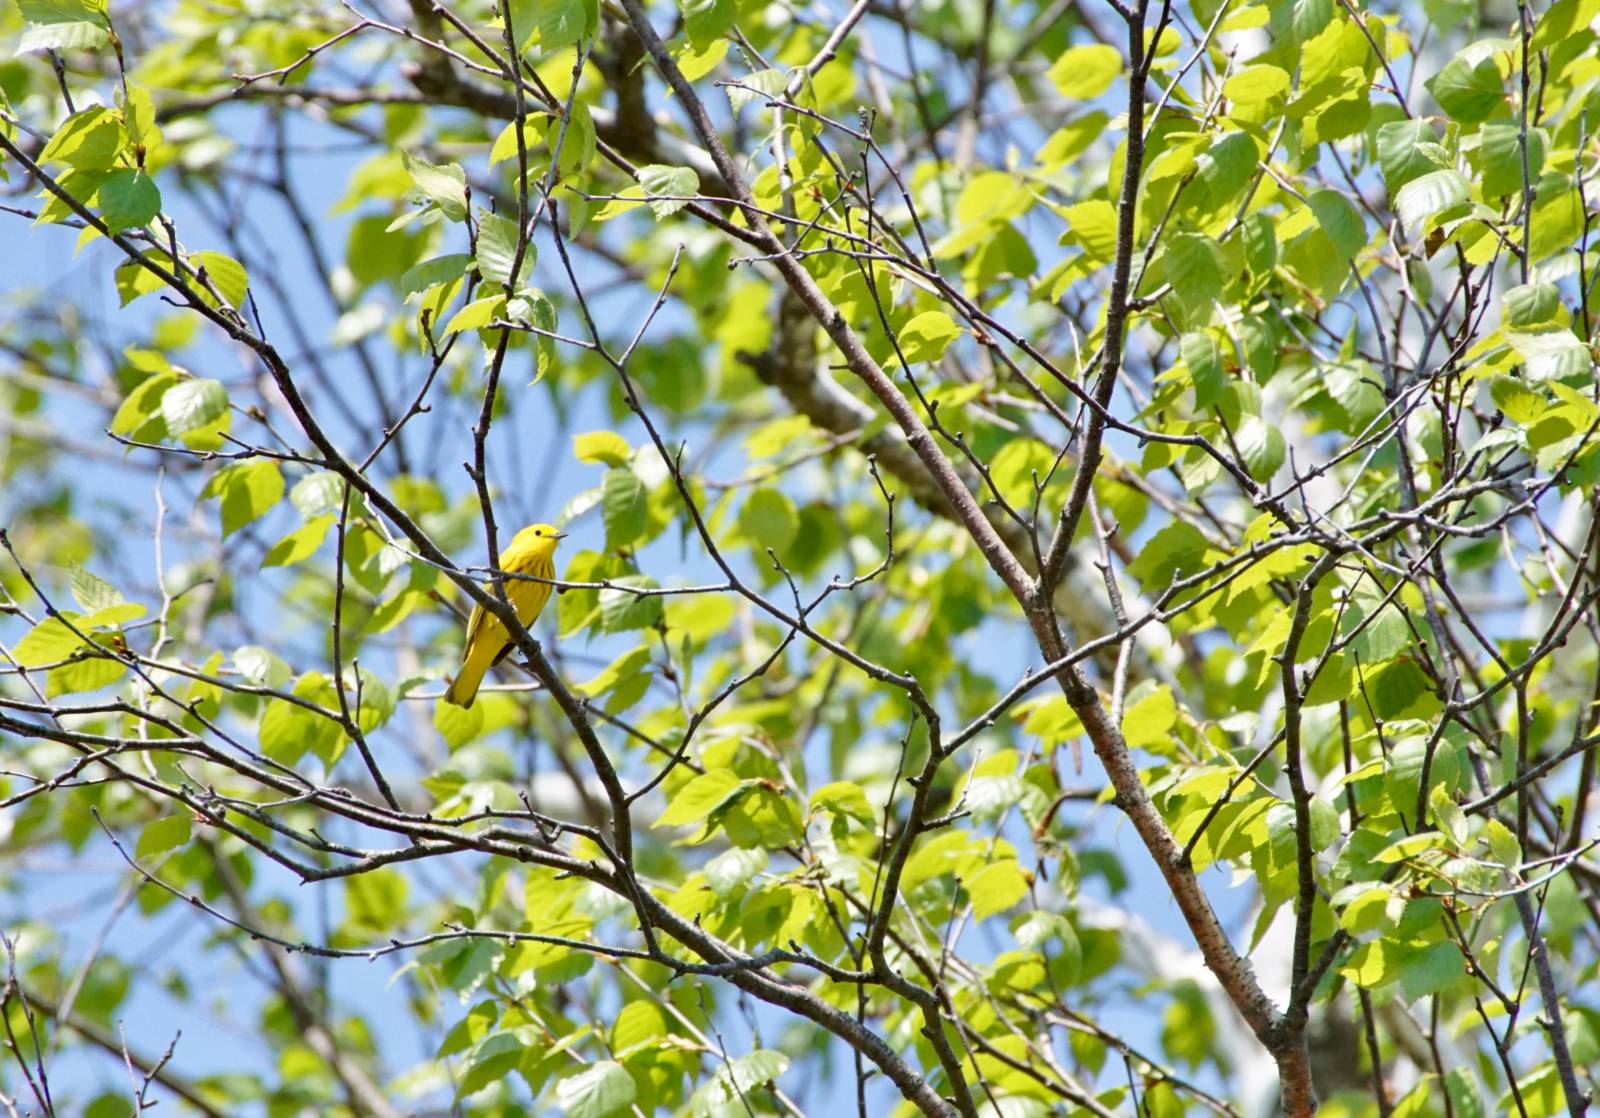 a yellow warbler sits on a branch in a tree with green leaves